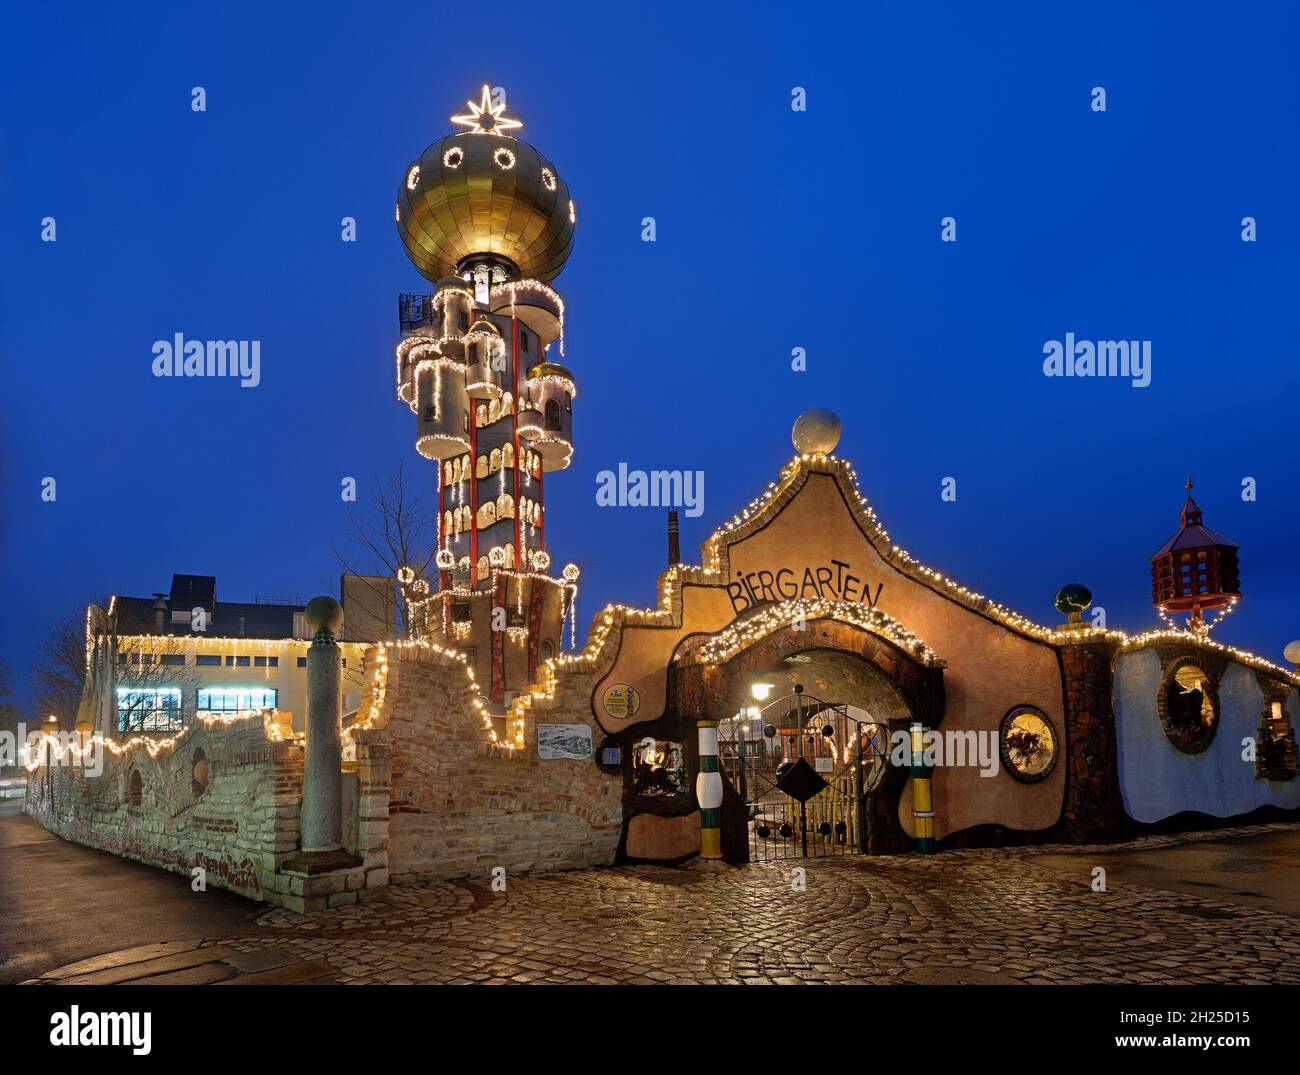 Kuchlbauers Beer World with Christmas illuminations and loads of shining decoration merchandise. Stock Photo